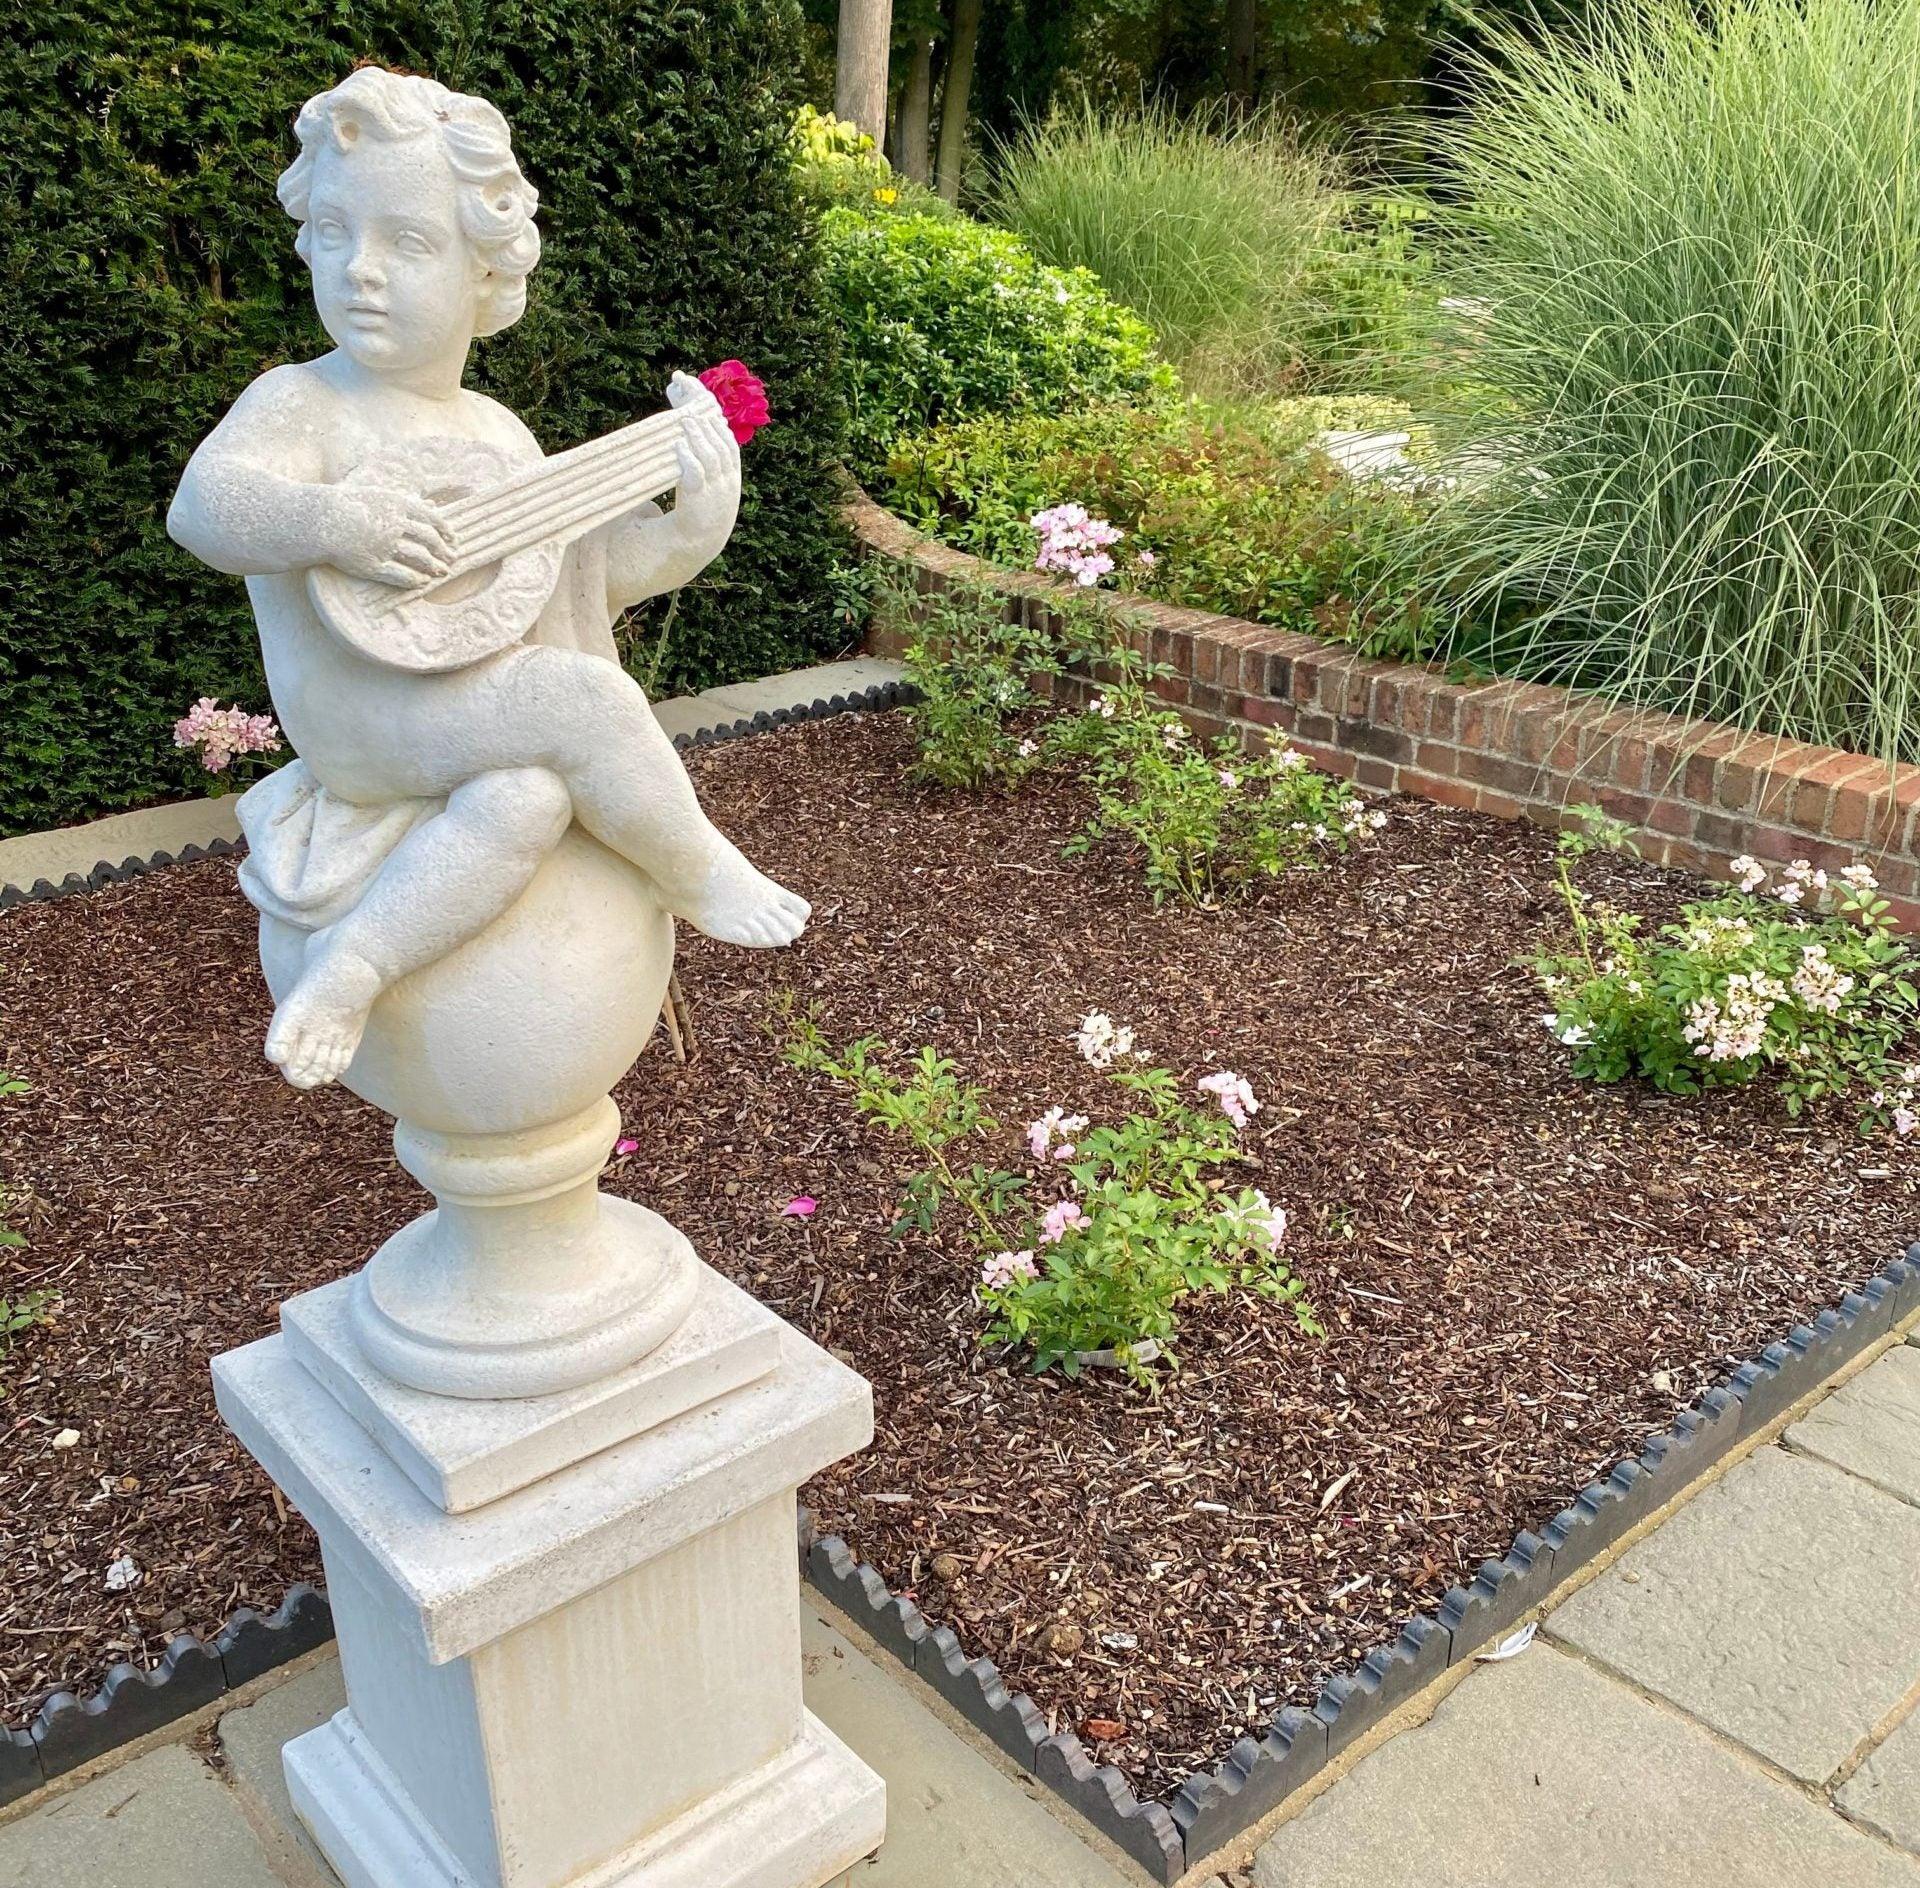 A stone statue of a cherub playing a guitar is placed in a well-maintained garden. The cherub is perched on a sphere atop a pedestal, surrounded by Brisks Bark Mulch for plant protection. Behind the statue, there is a flower bed with green plants, pink flowers, and a brick border.